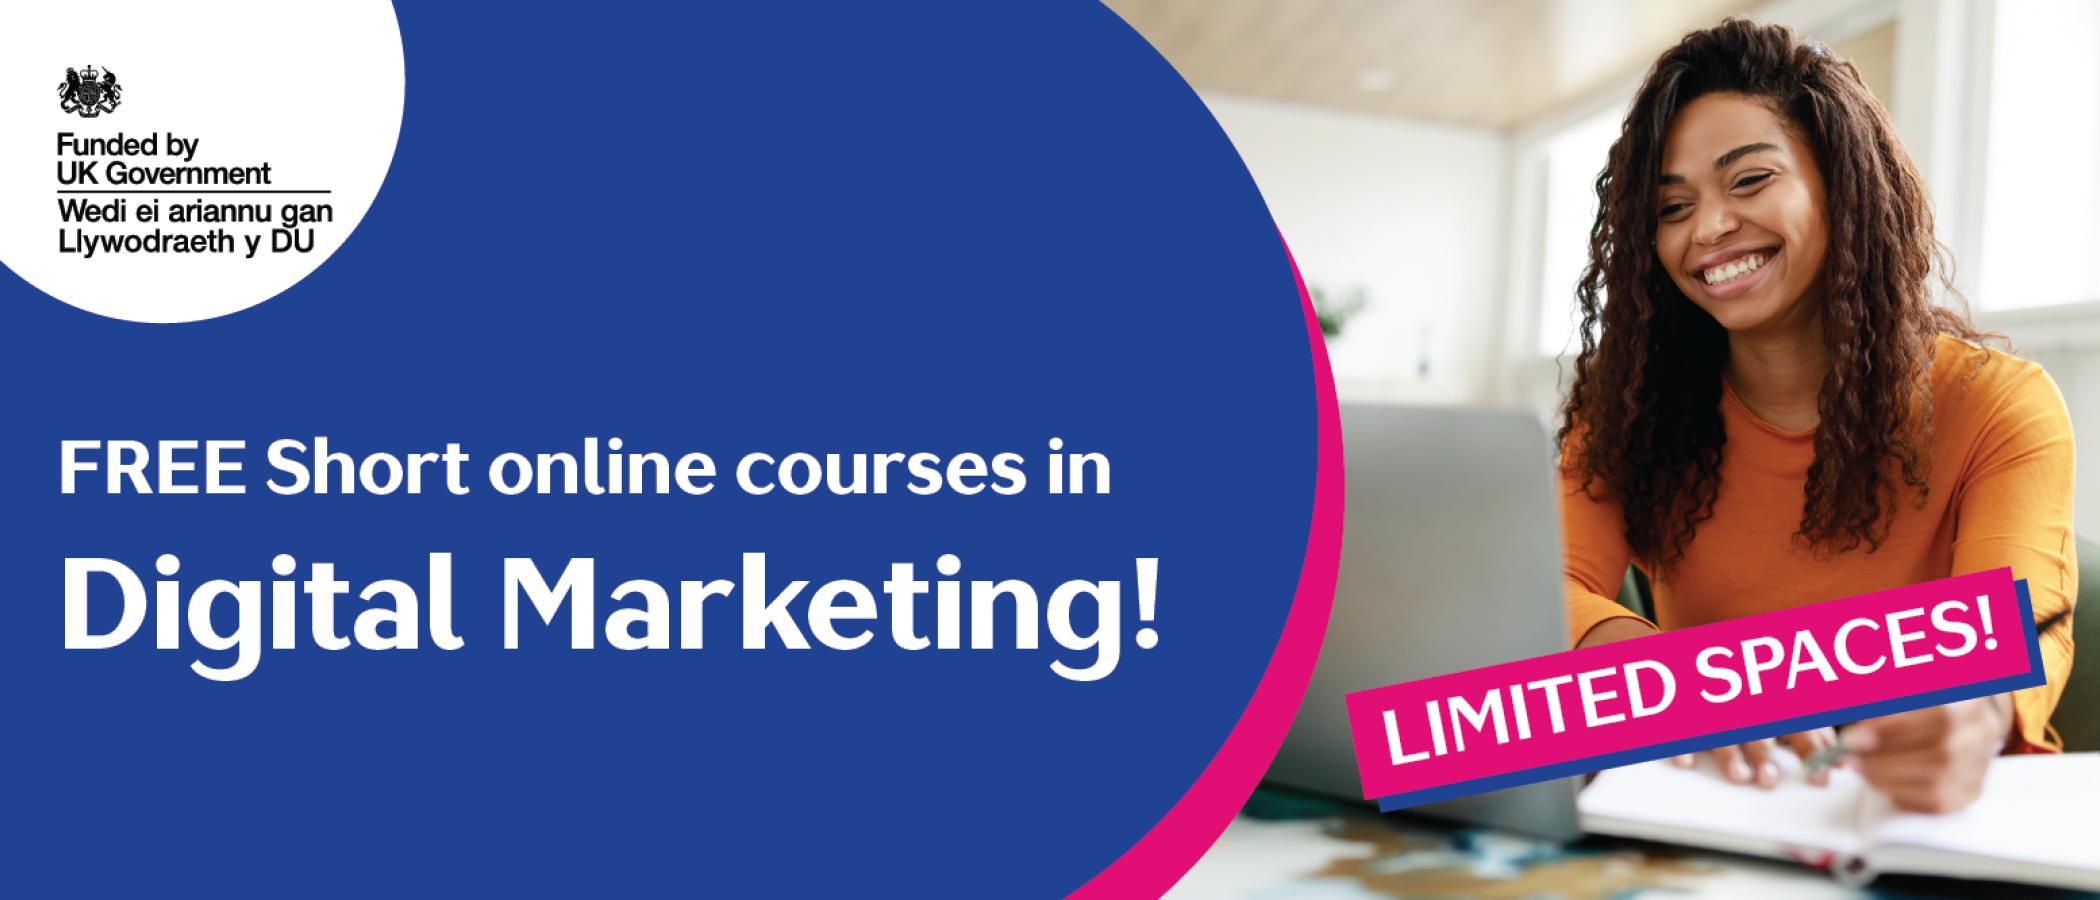 A promotional image advertising free one-day online courses in Digital Marketing.